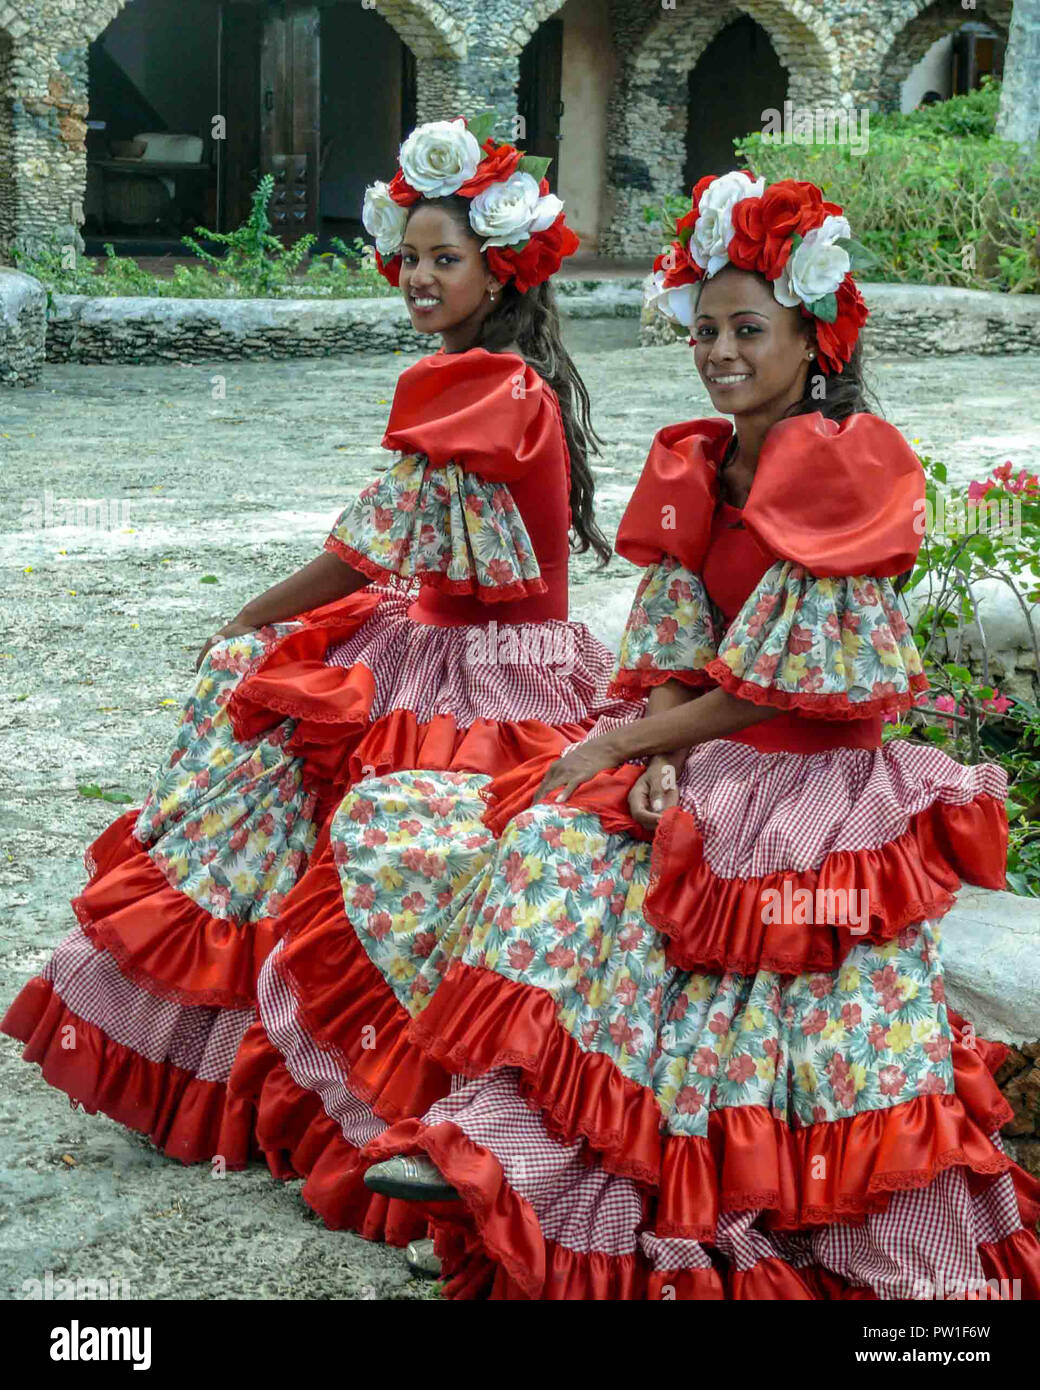 January 14, 2009 - La Romana, Dominican Republic - A pair of female dancers  in costume in Altos de ChavÃ³n, a re-creation of a 16th century  Mediterranean style European village atop the